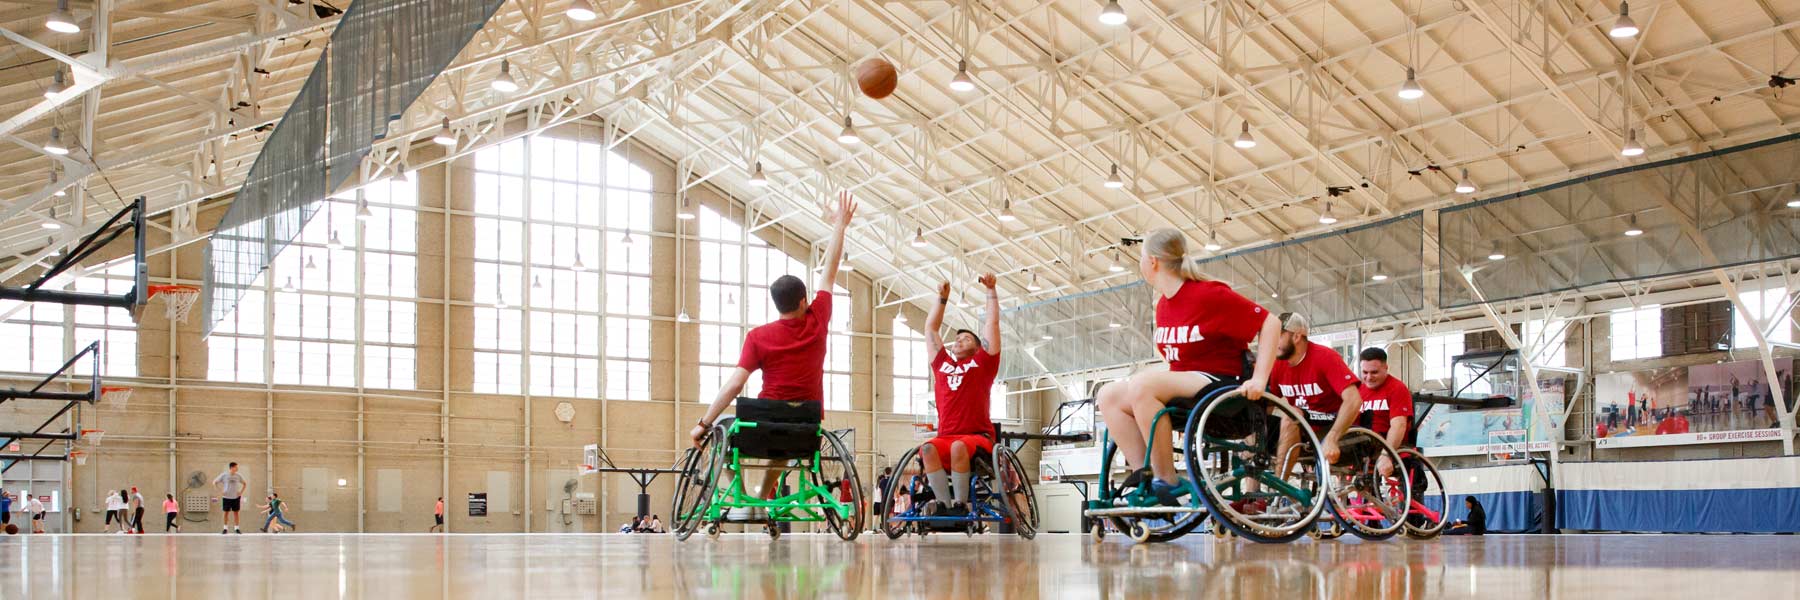 five people in wheelchairs playing basketball